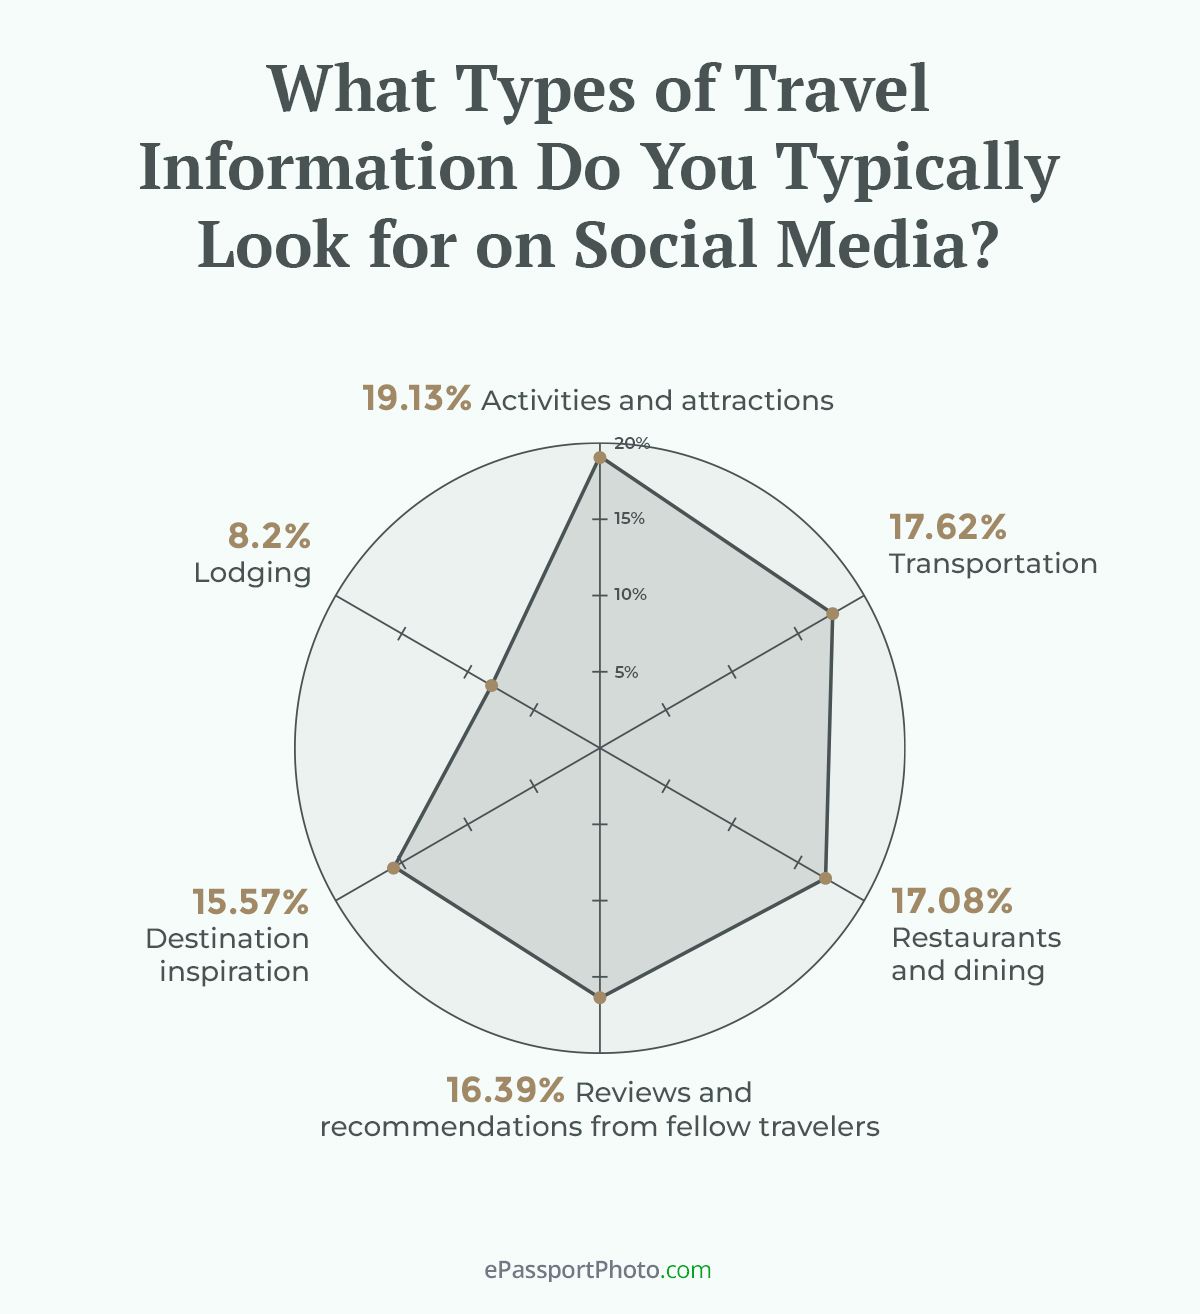 most travelers search for activities and attractions on social media at 19.13%